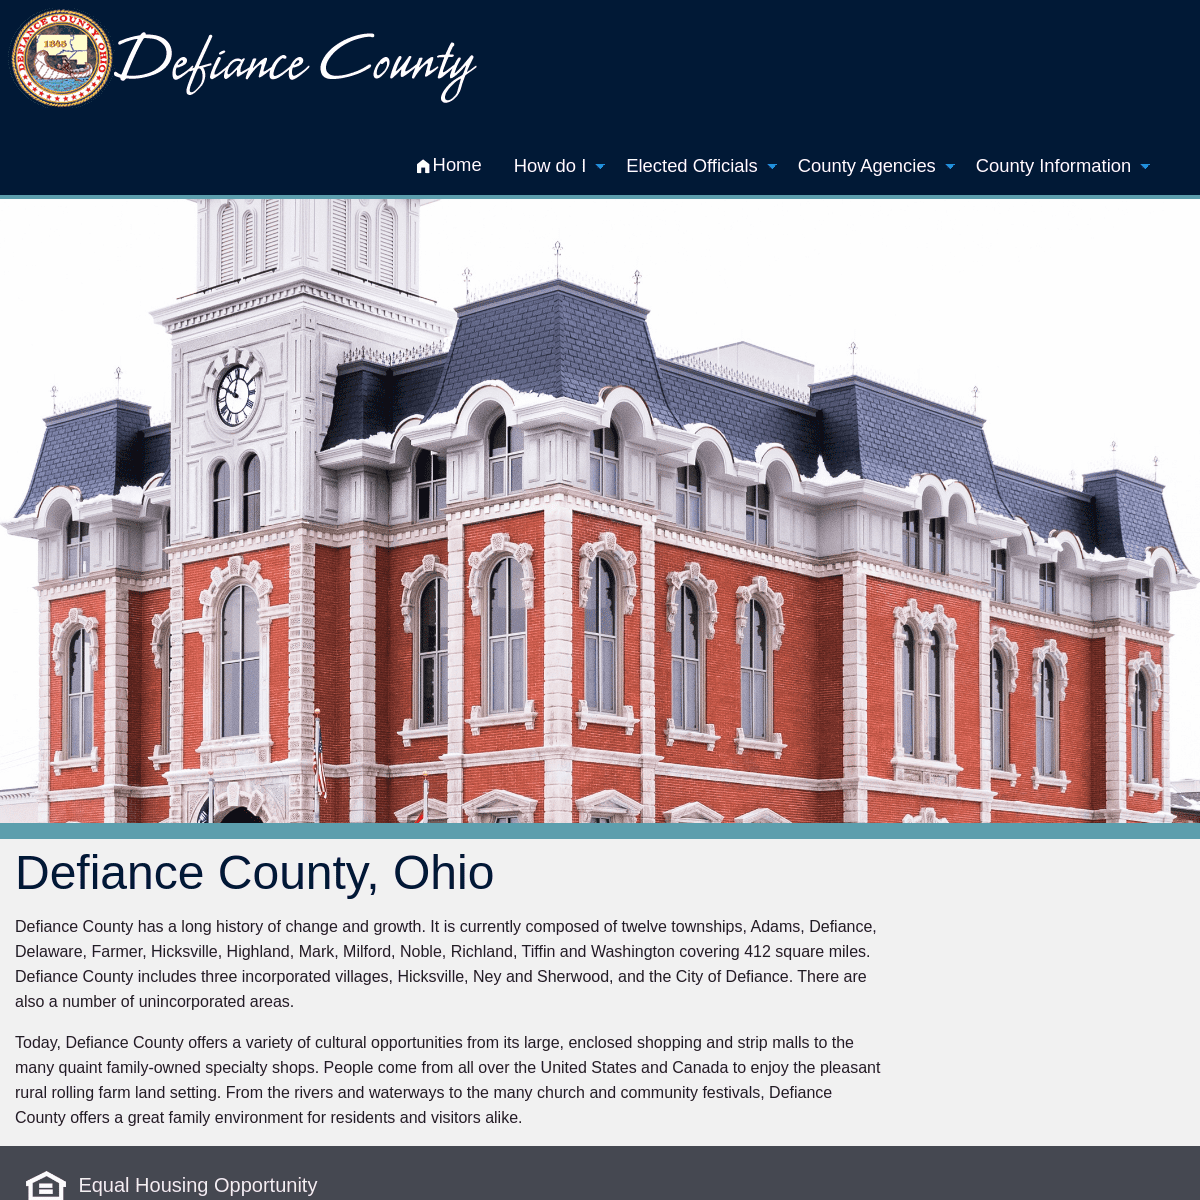 A complete backup of https://defiance-county.com